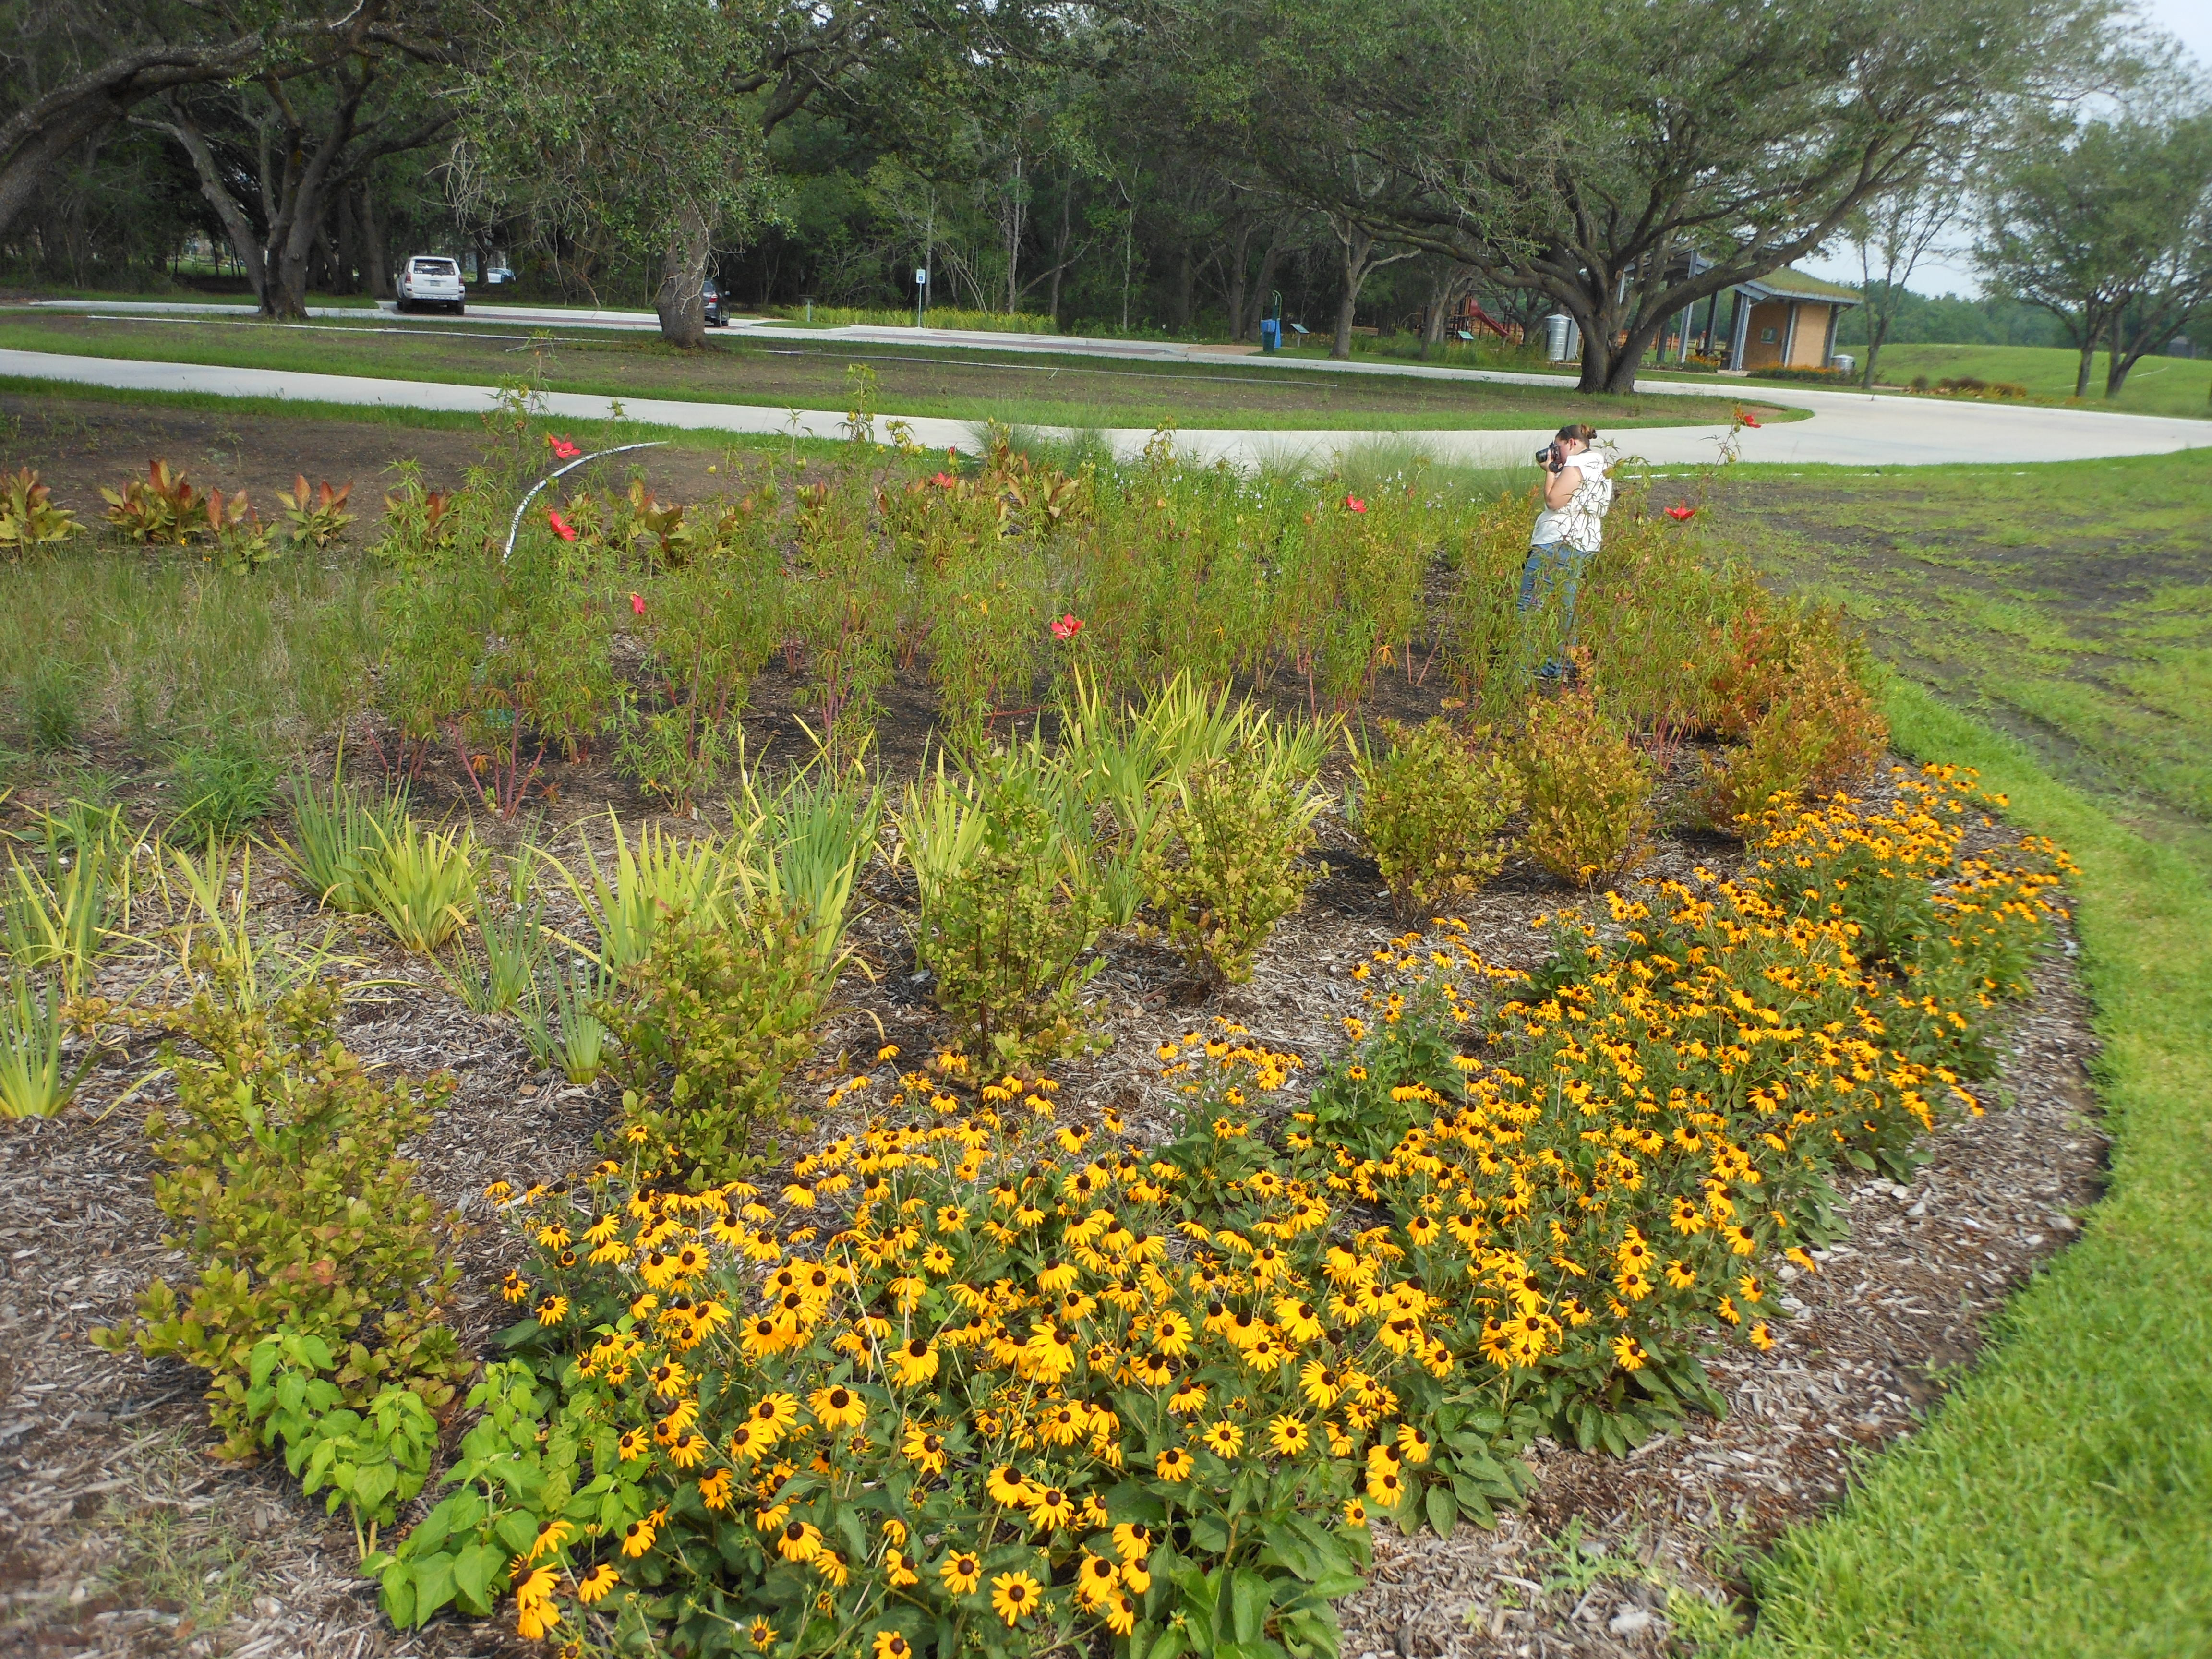 Rain Garden with lots of yellow flowers